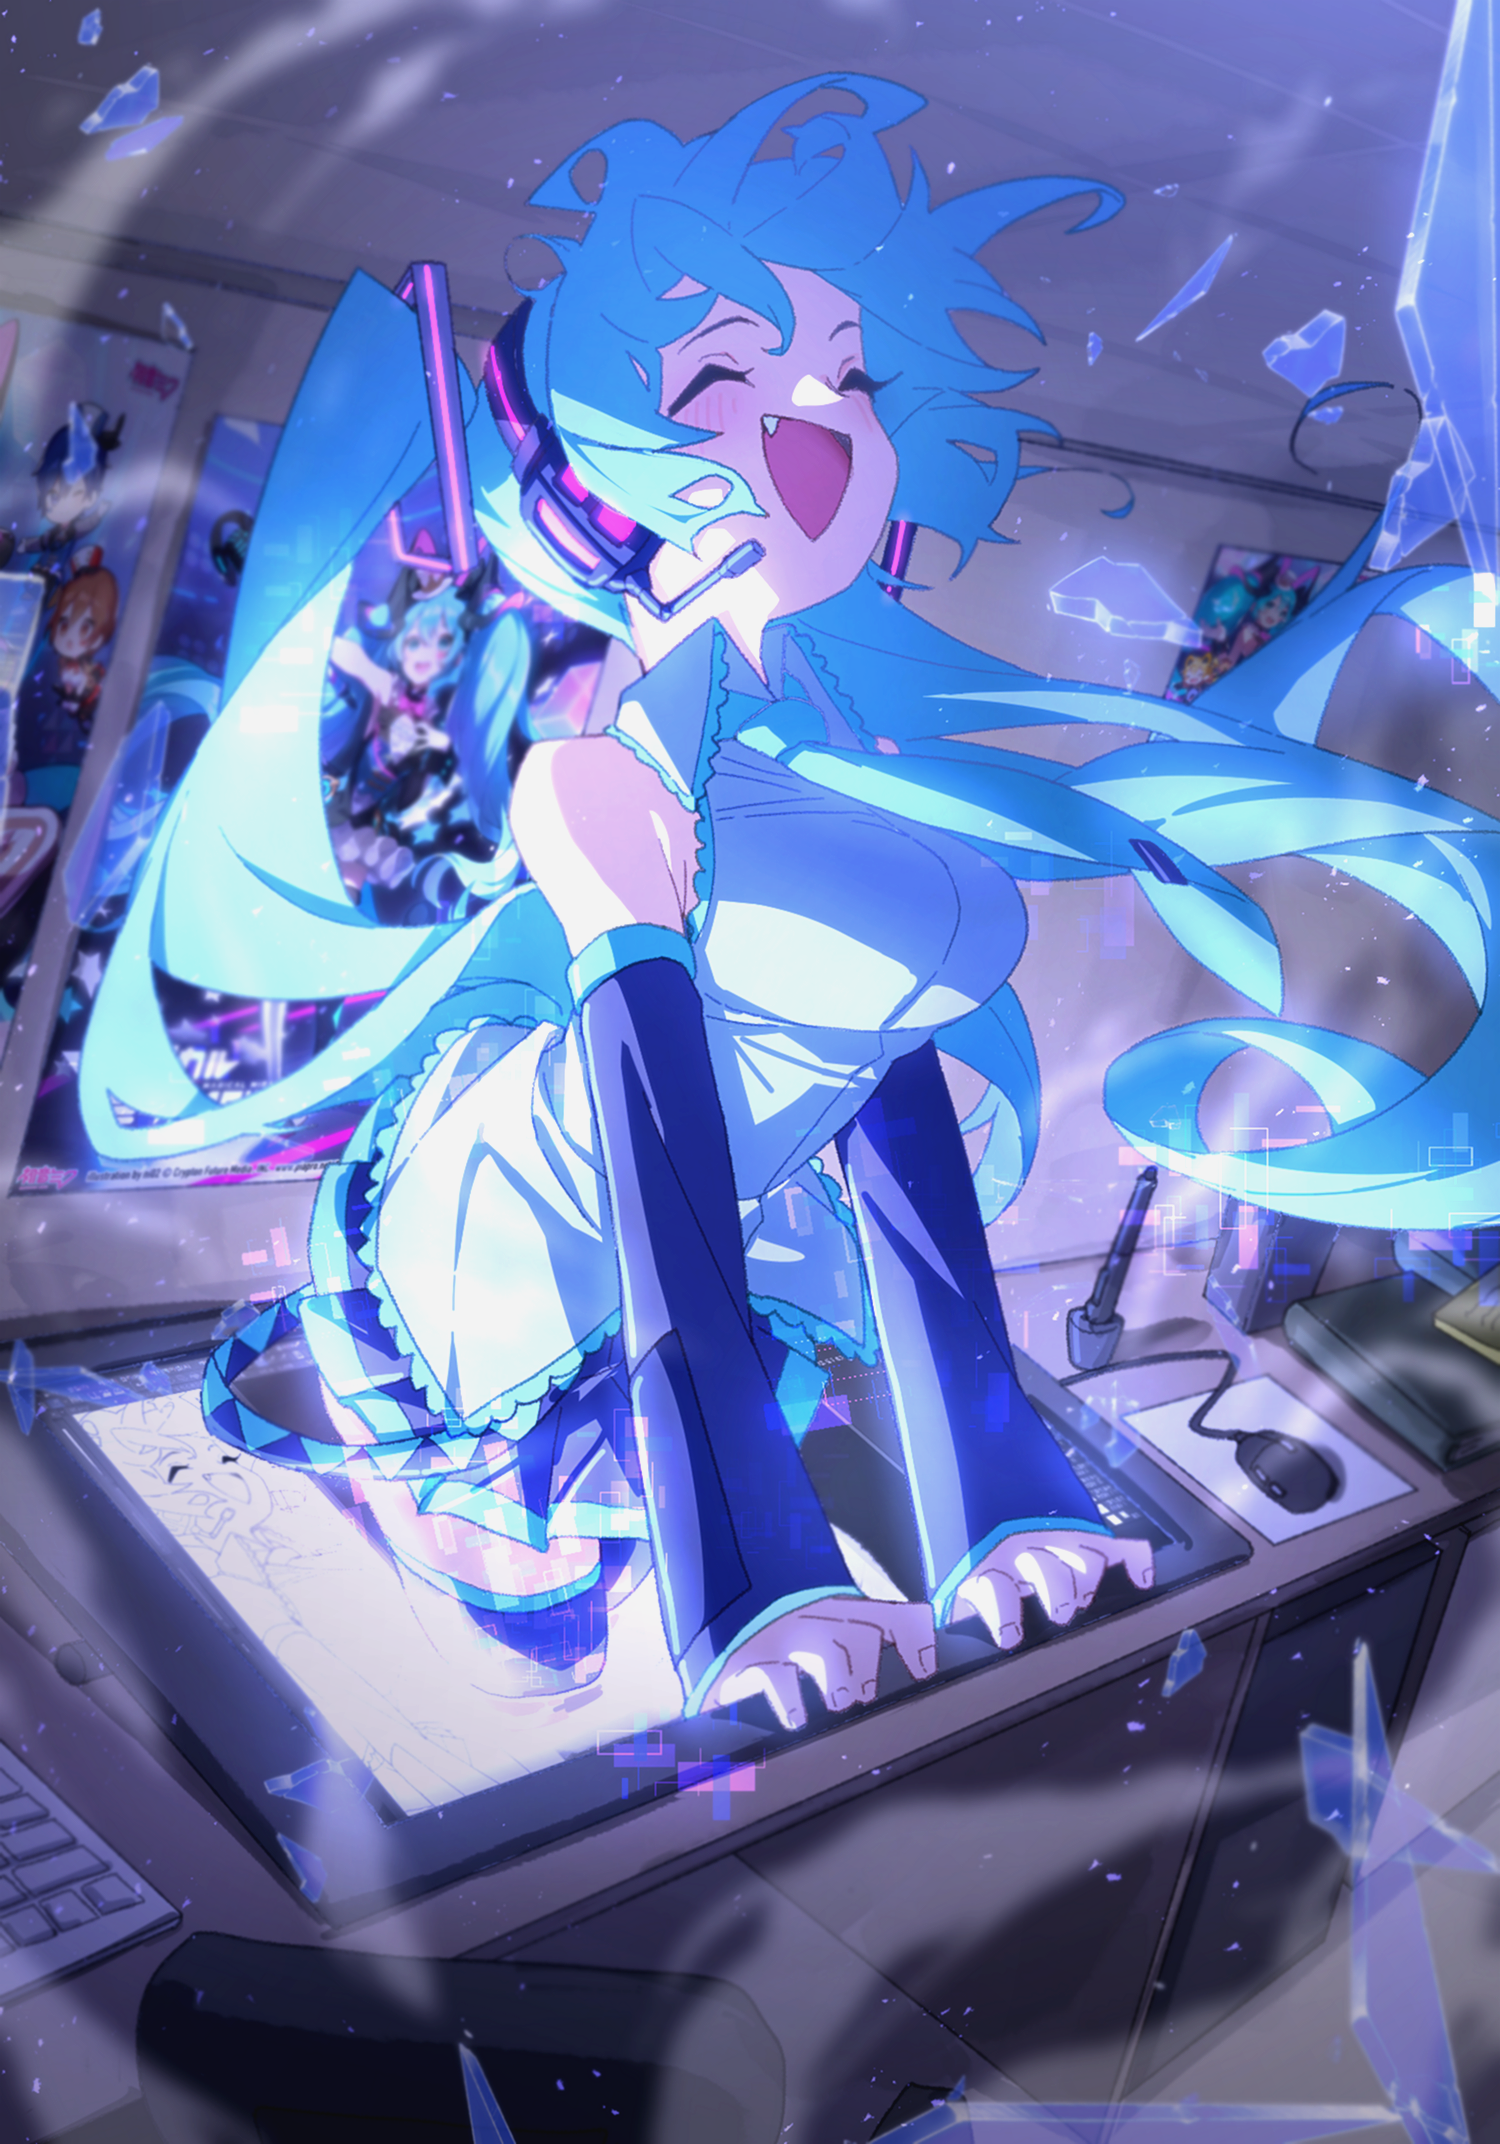 Anime 1500x2144 anime anime girls Vocaloid Hatsune Miku twintails long hair open mouth closed eyes portrait display blue hair broken glass headsets room poster